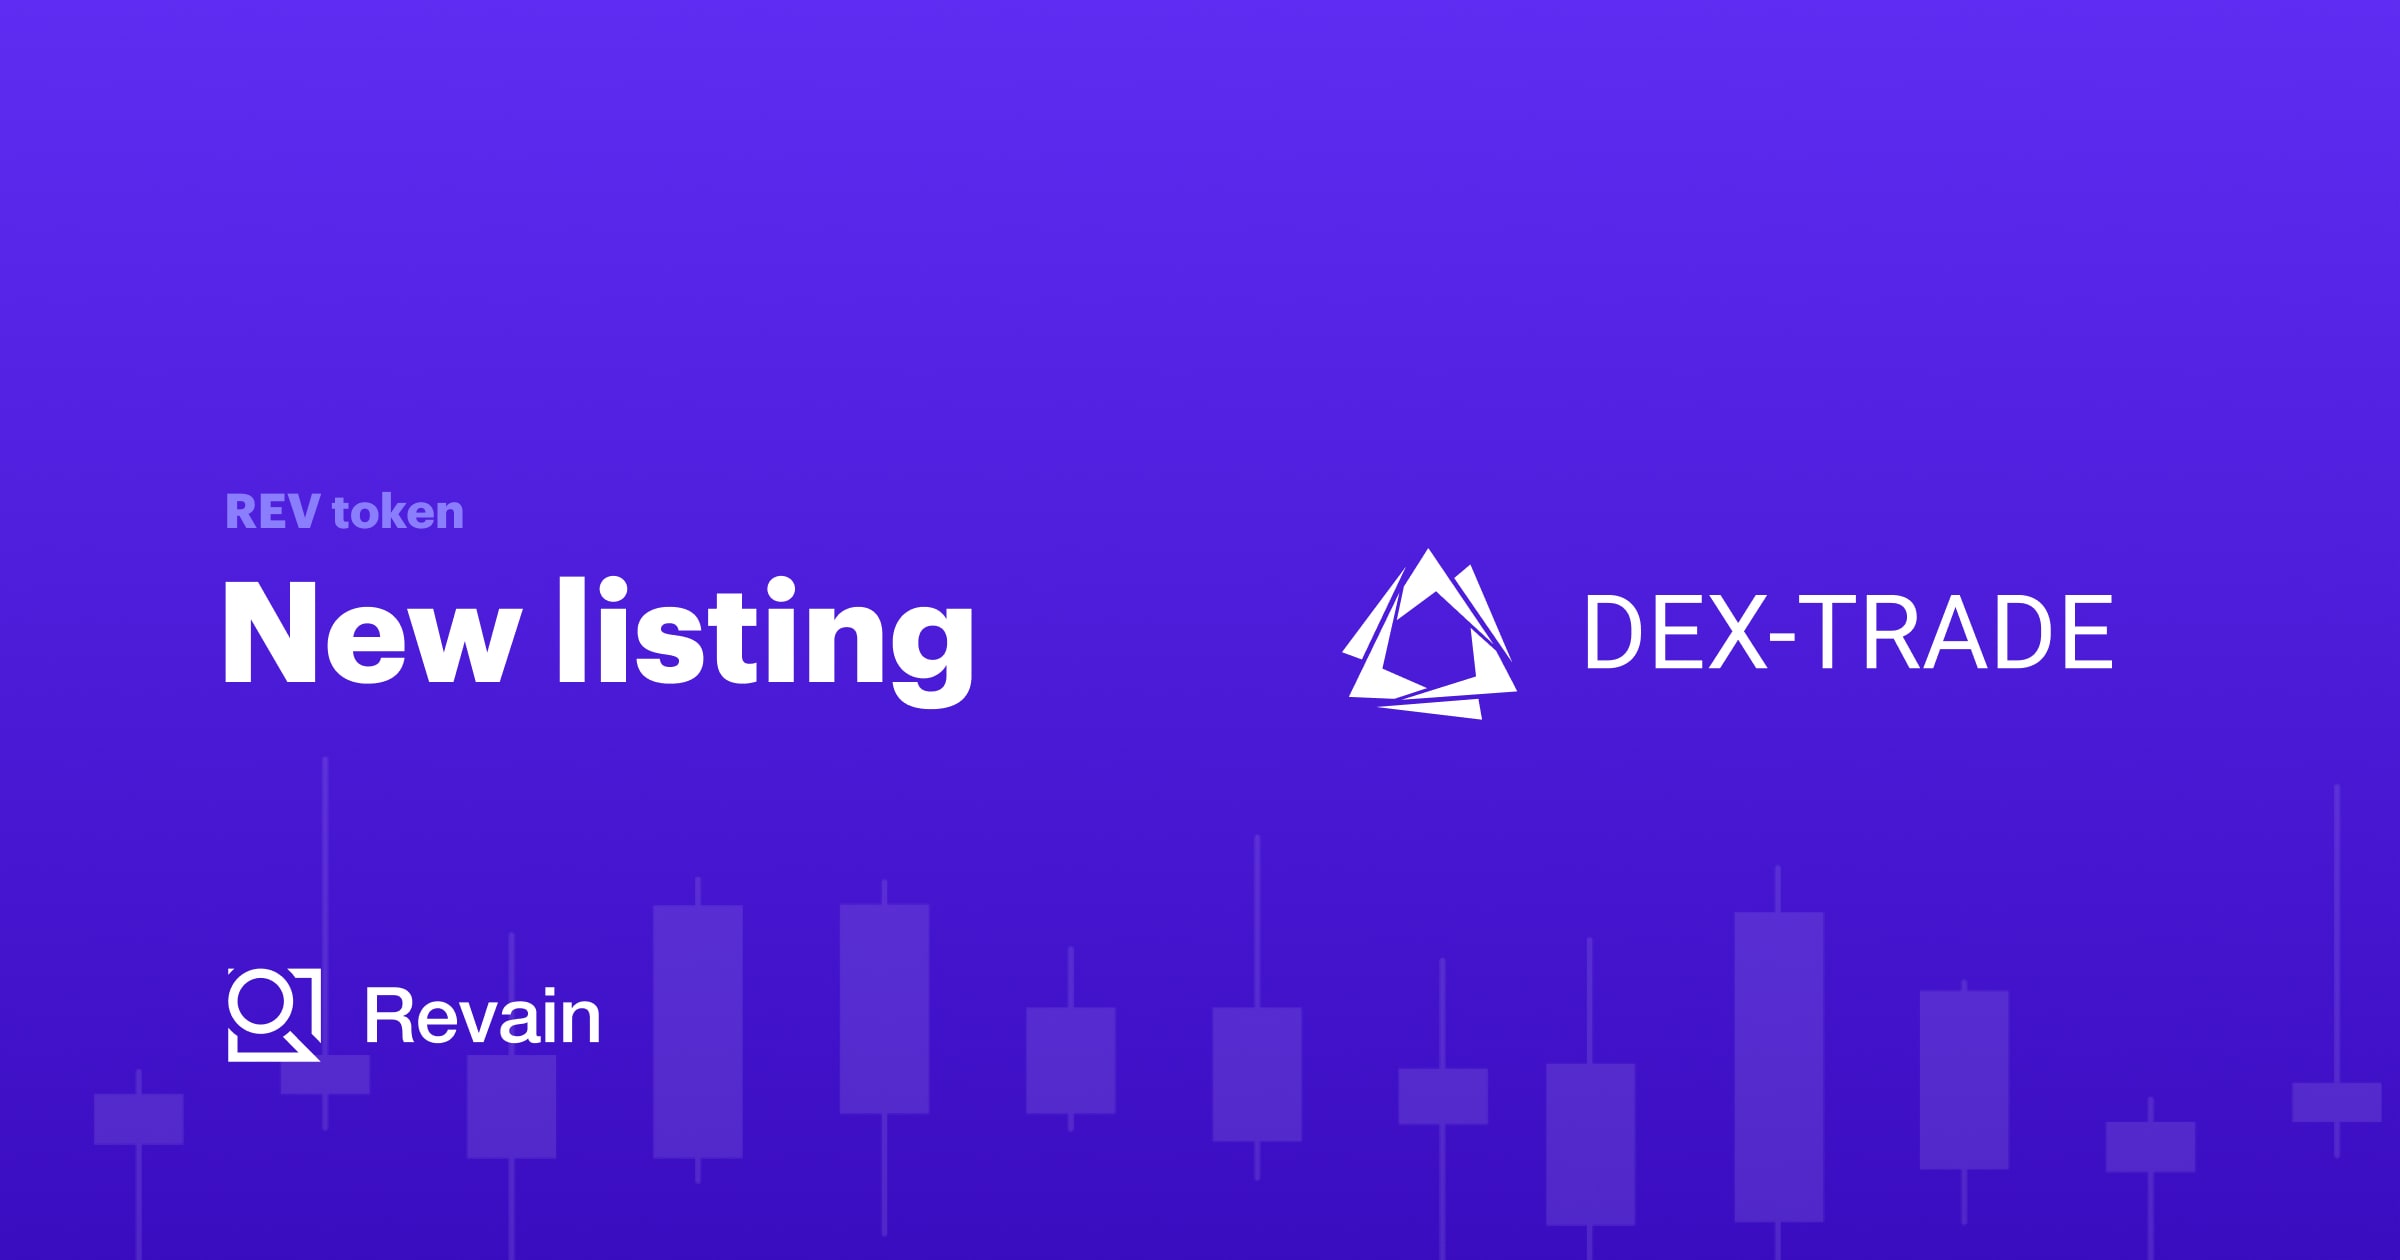 Revain is listed on the Dex-Trade